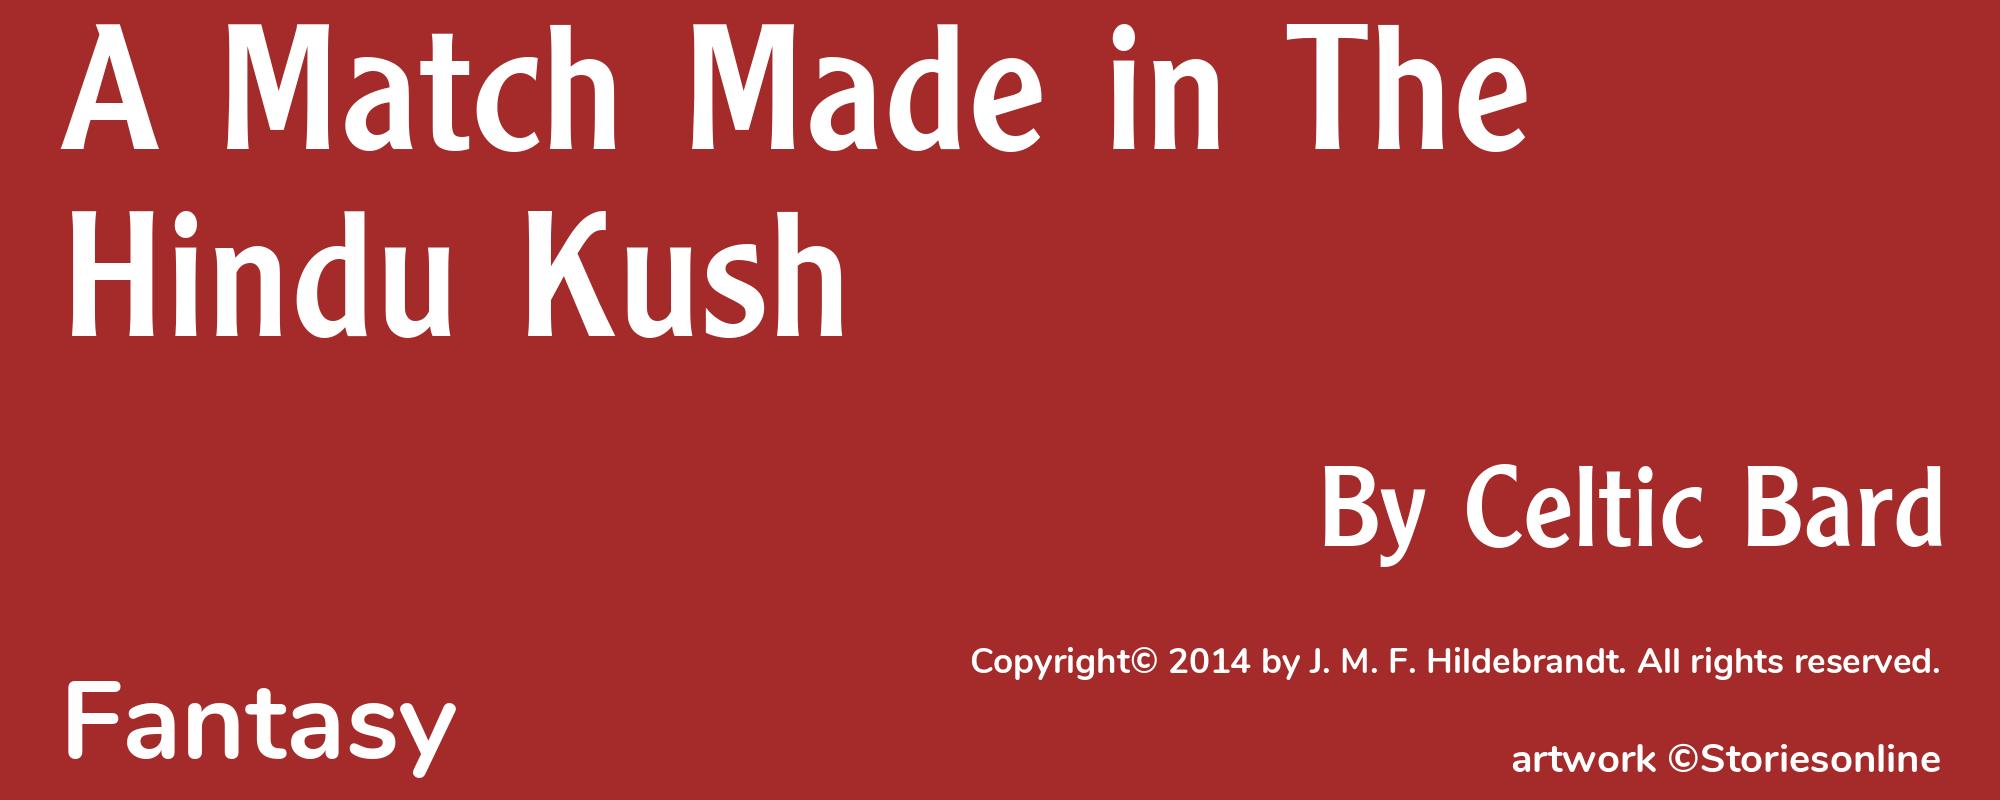 A Match Made in The Hindu Kush - Cover